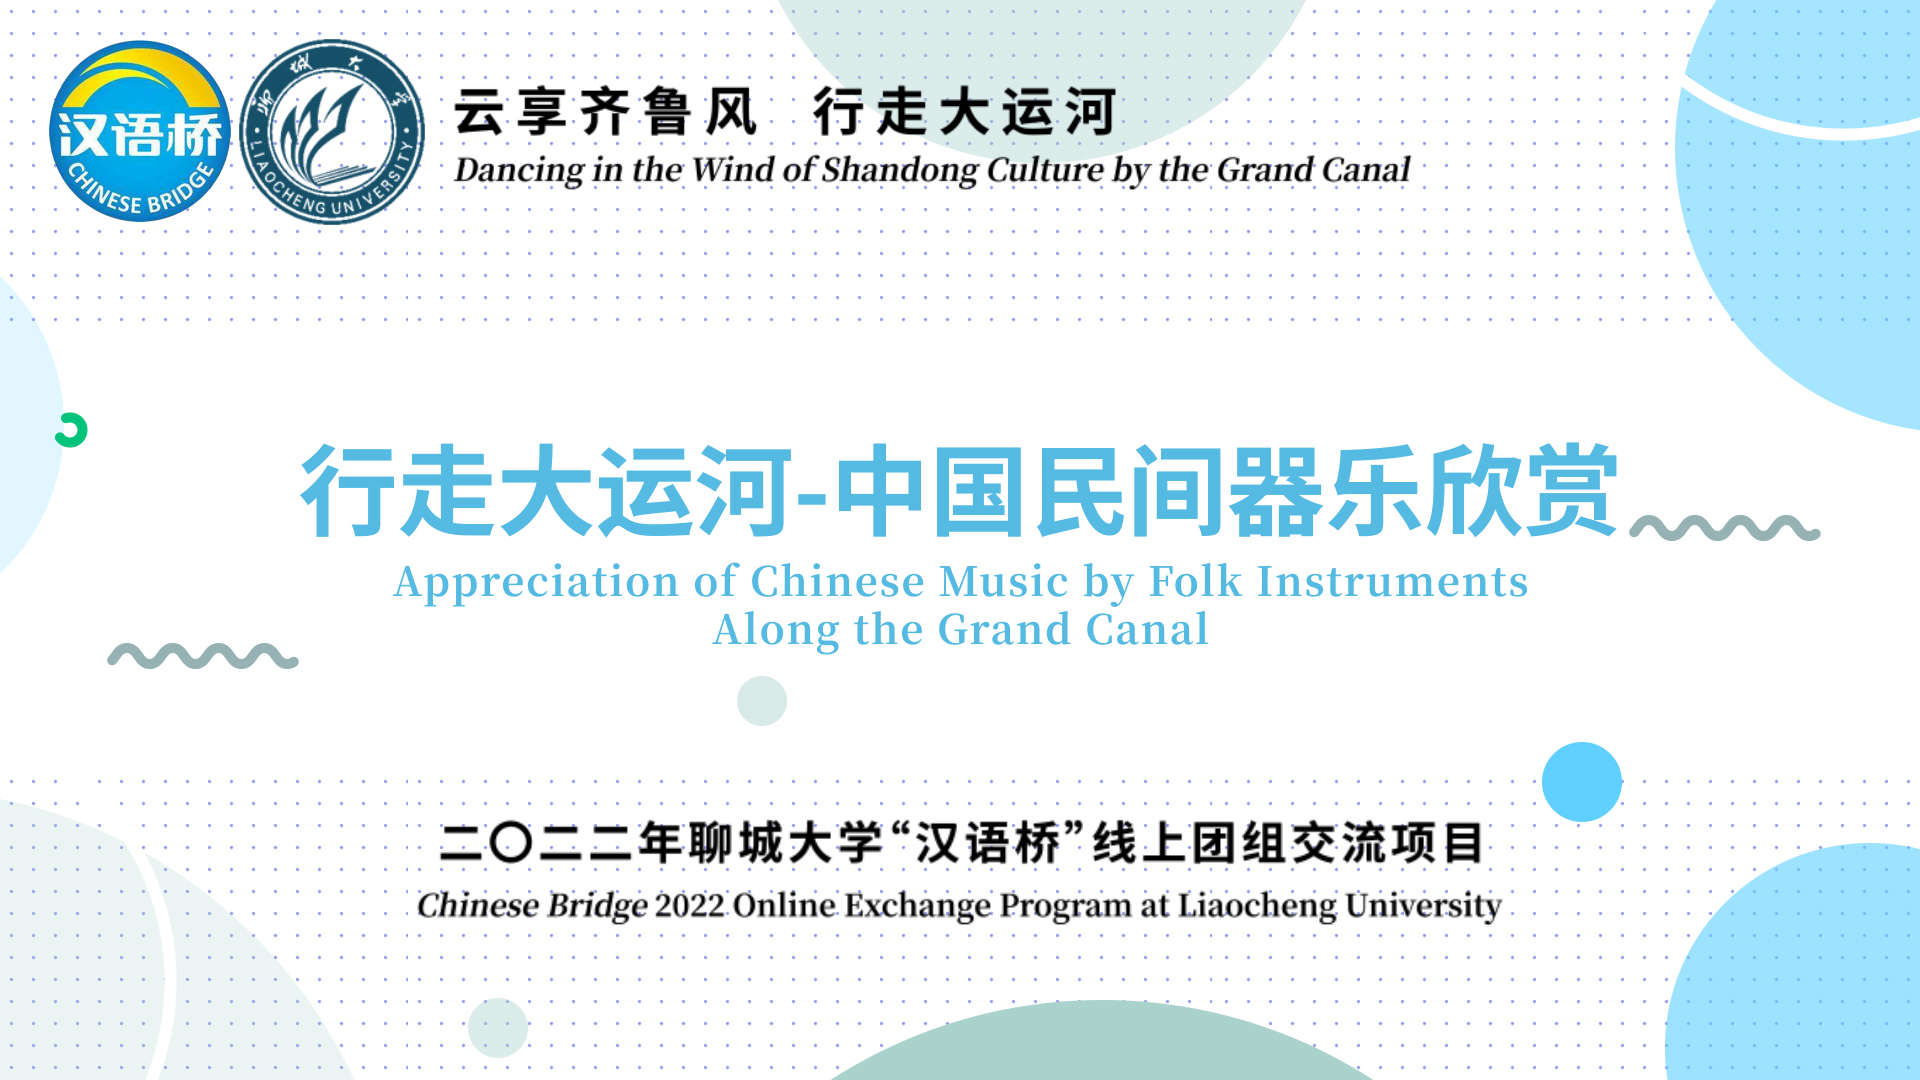 Appreciation of Chinese Music by Folk Instruments Along the Grand Canal